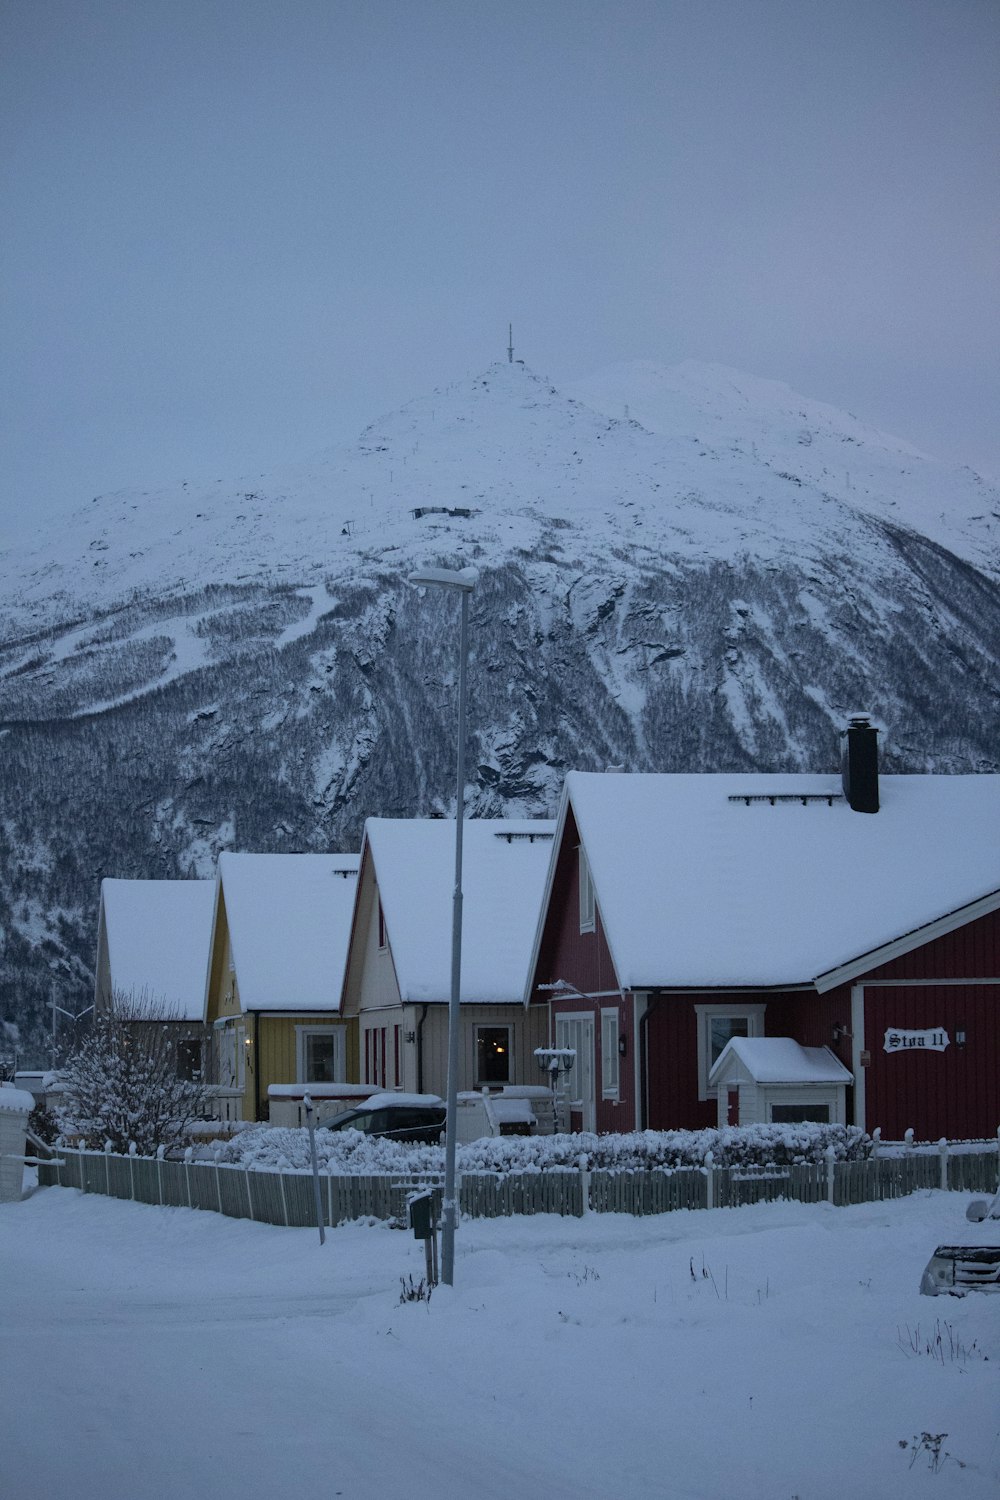 a snow covered mountain in the background with houses in the foreground